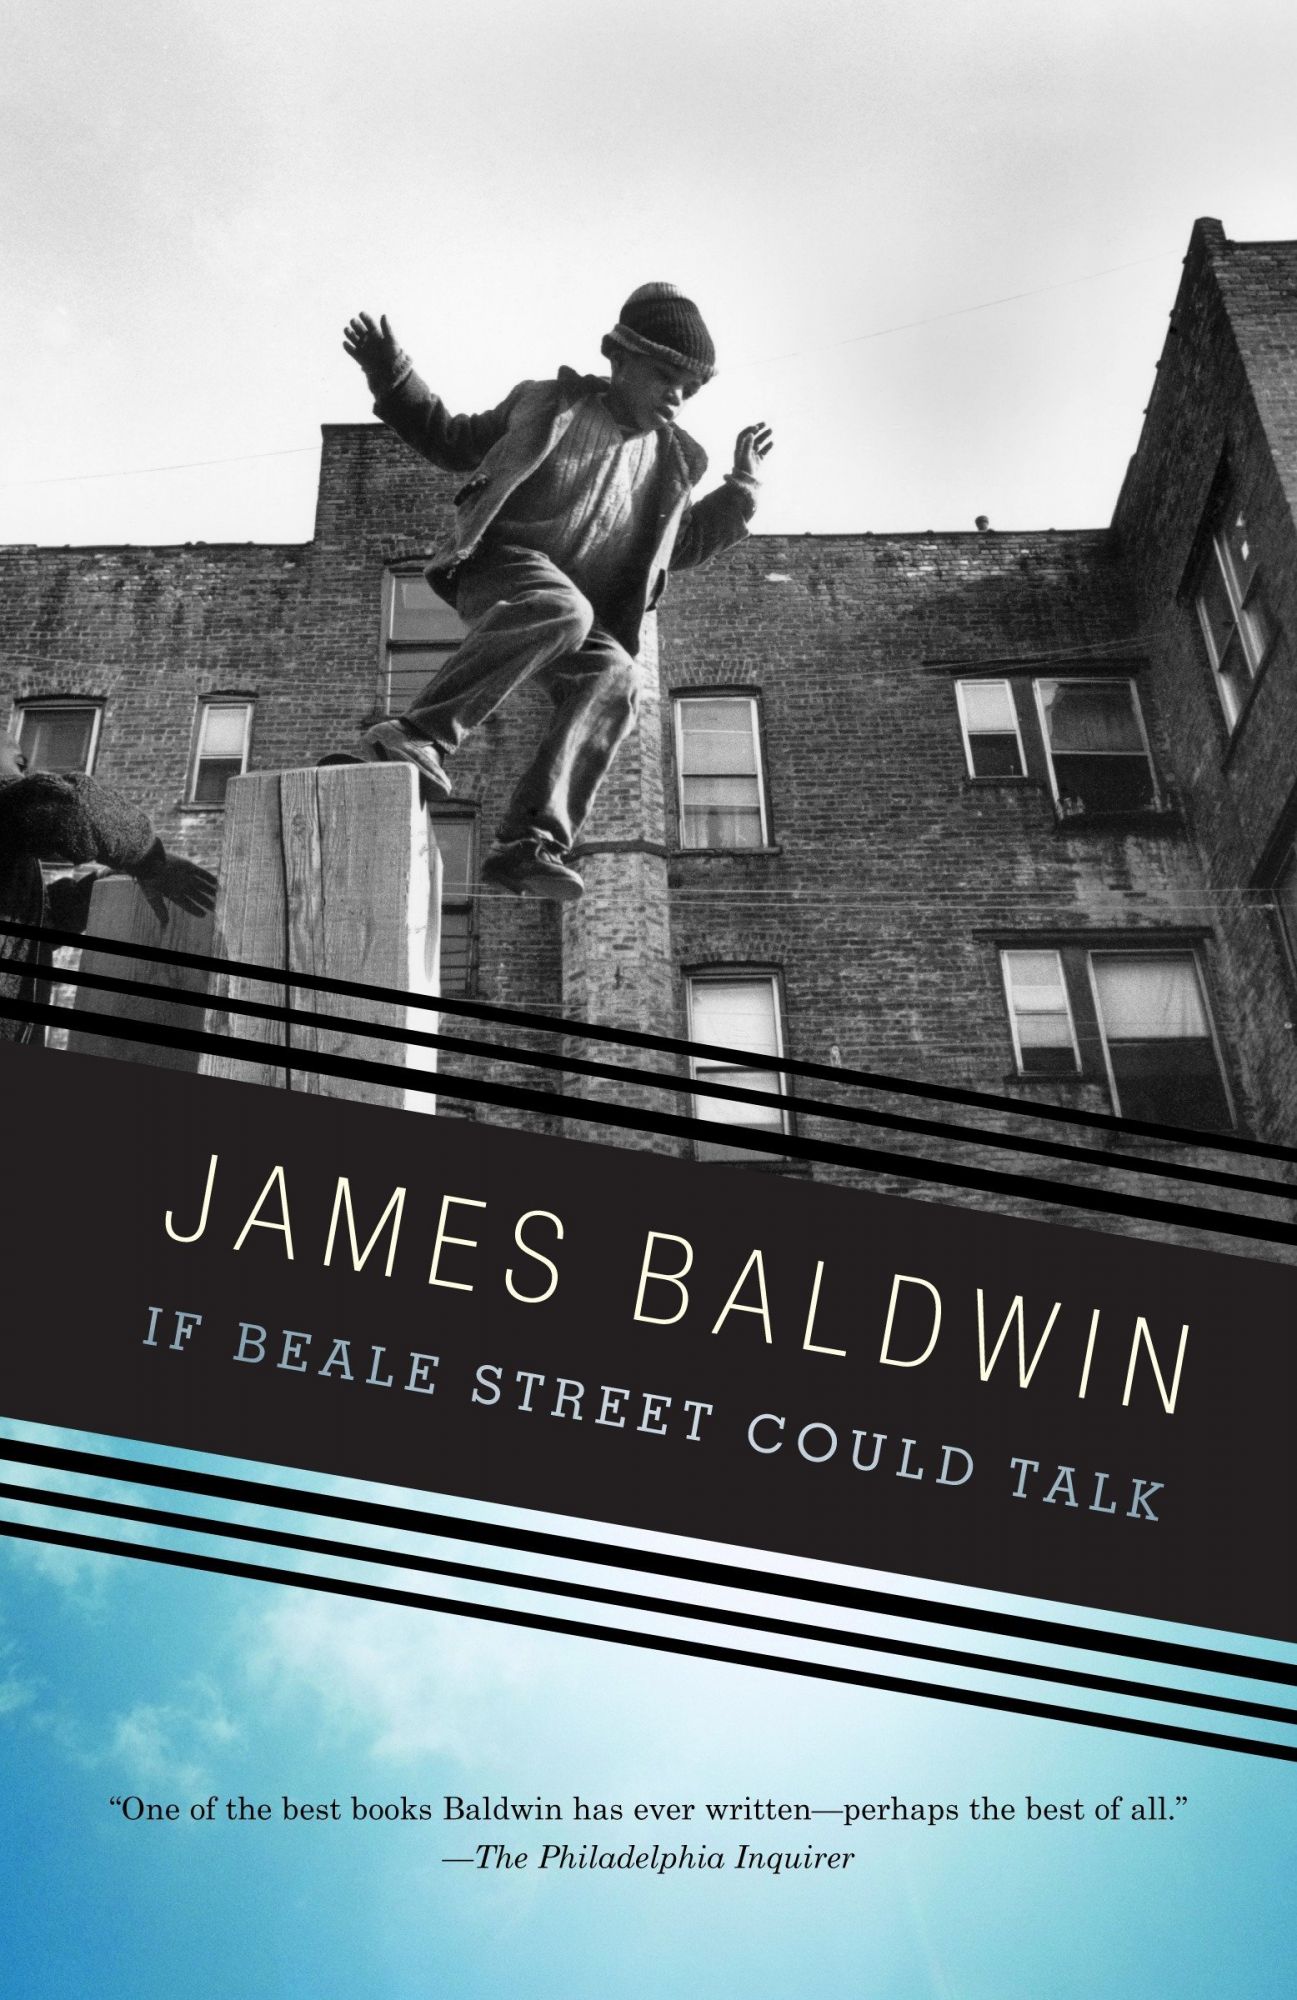 The book cover of If Beale Street Could Talk.